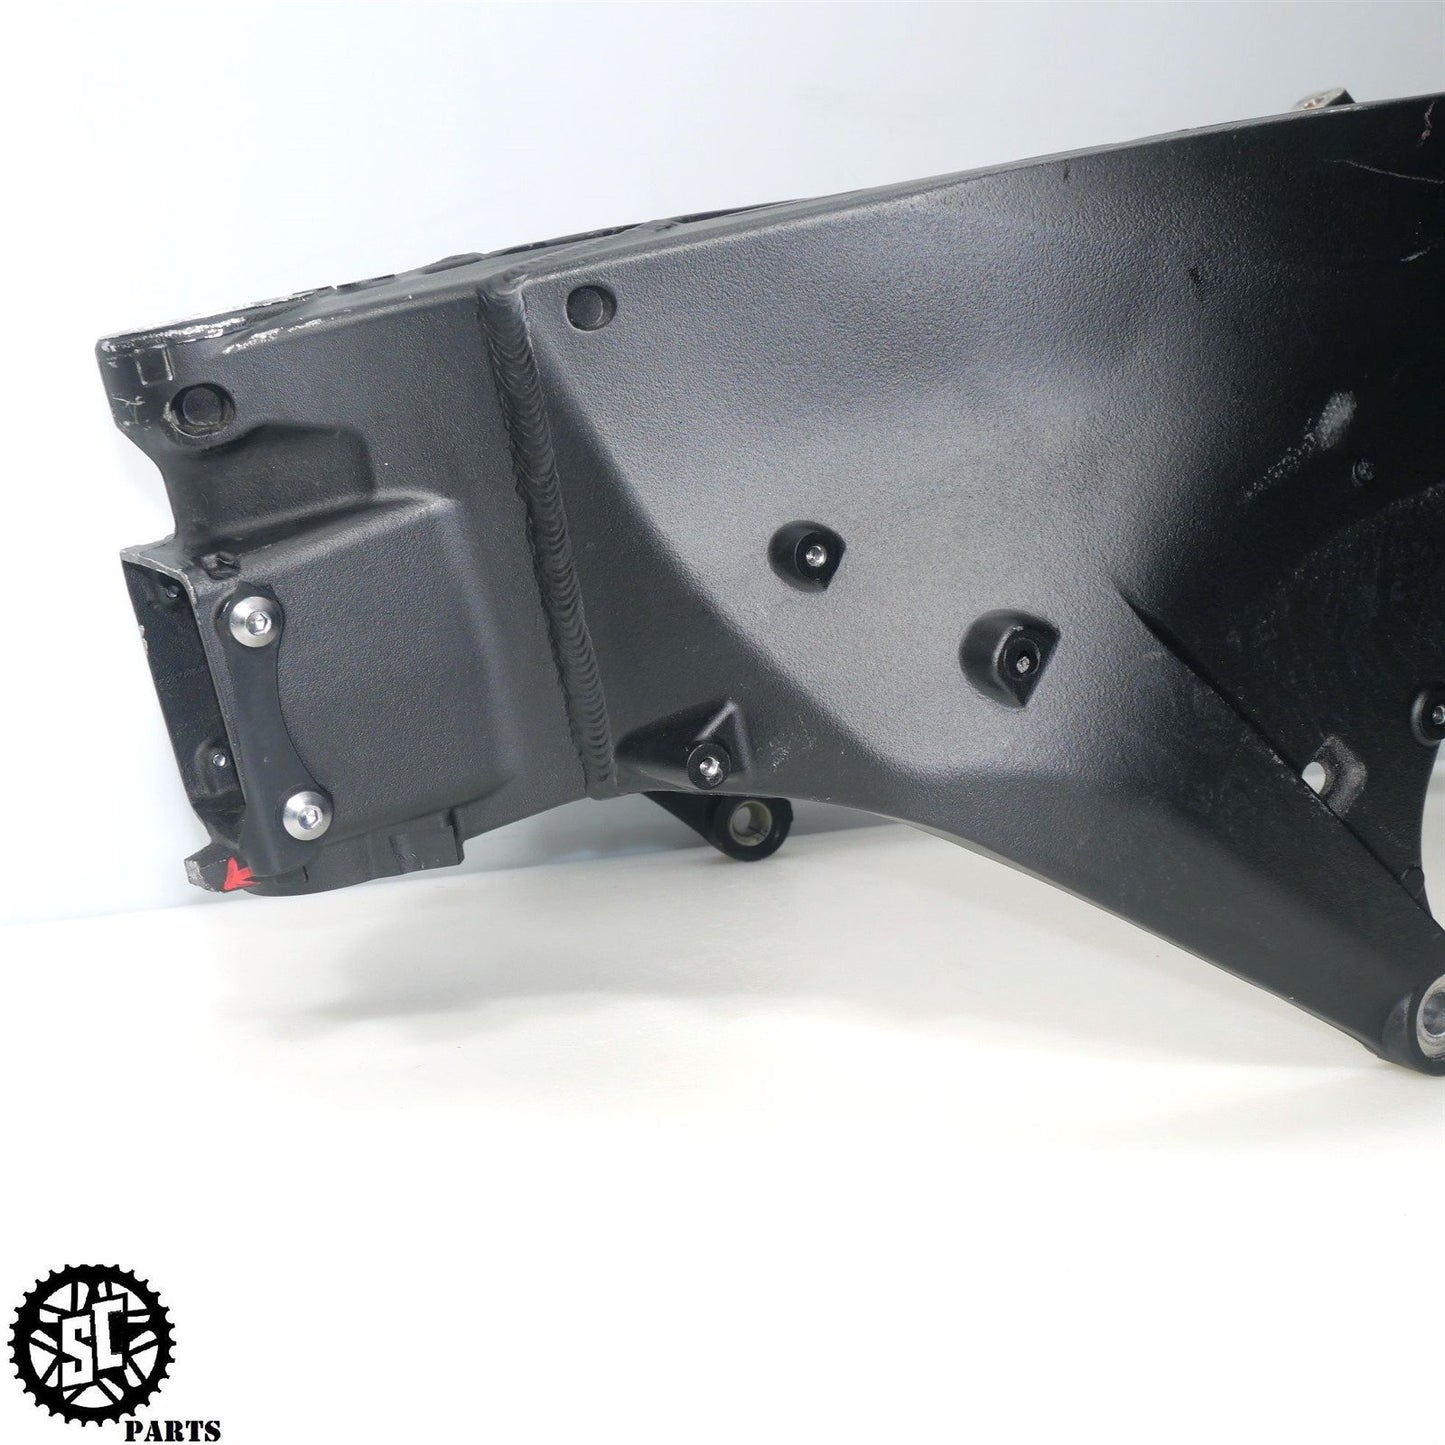 15-24 2019 YAMAHA YZF R1 FRAME CHASSIS *S* Y40